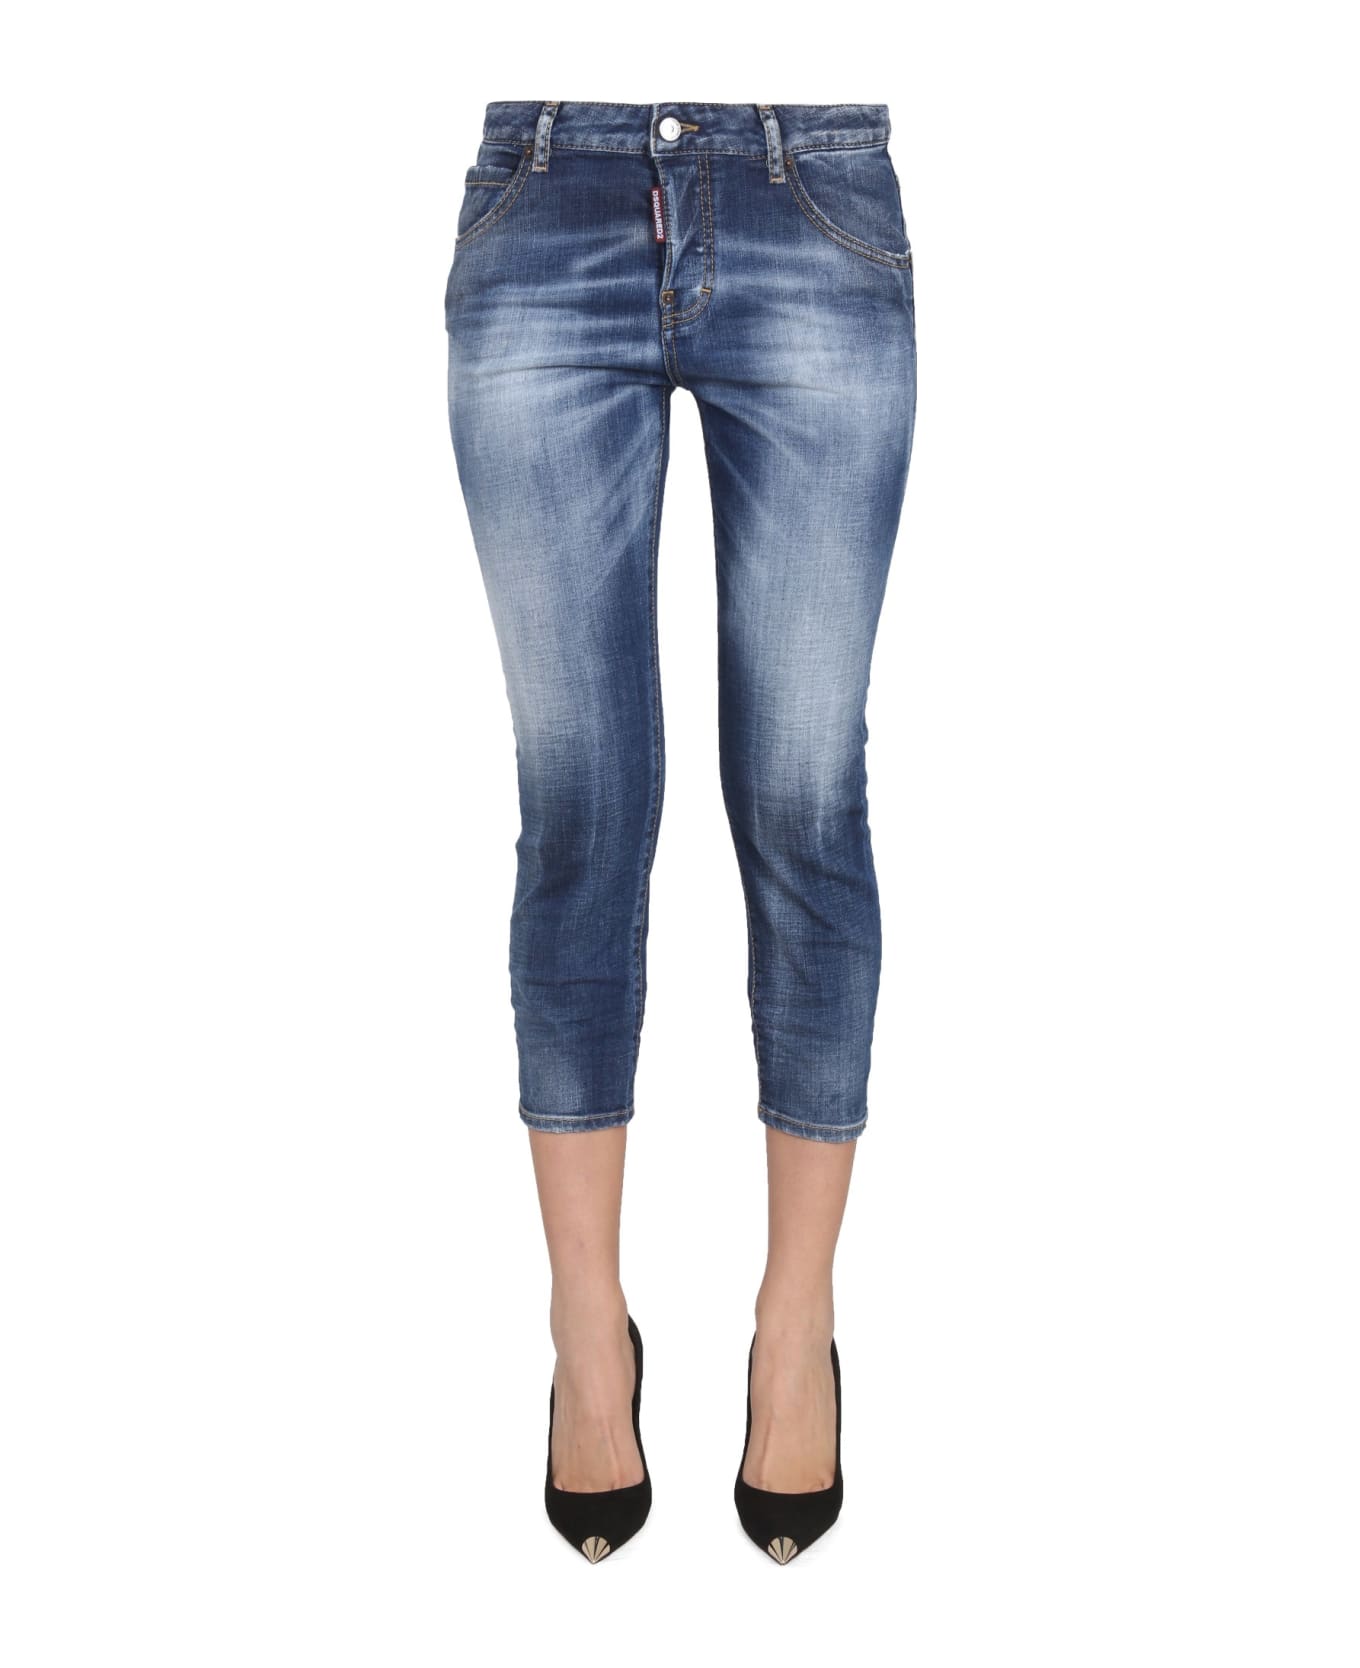 Dsquared2 Cool Girl Cropped Jeans - BLU デニム